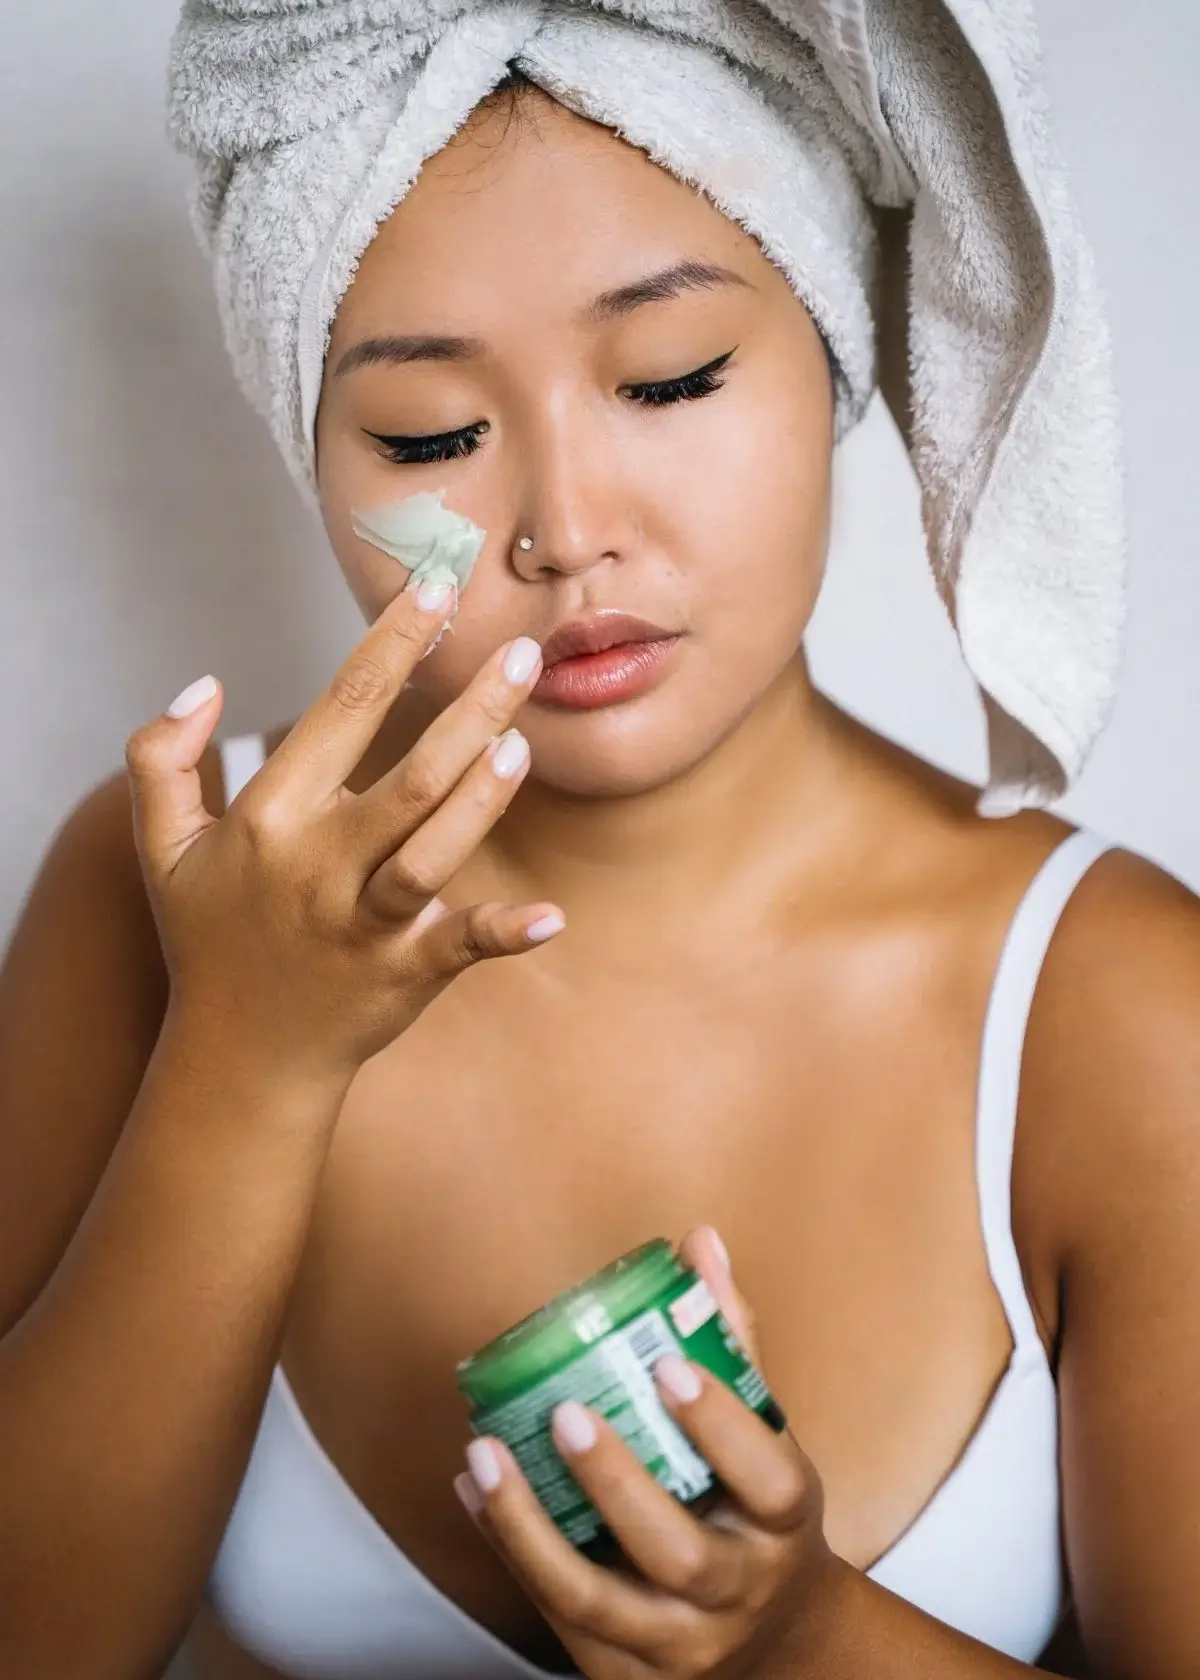 How to choose the right Acne Scar Treatment?